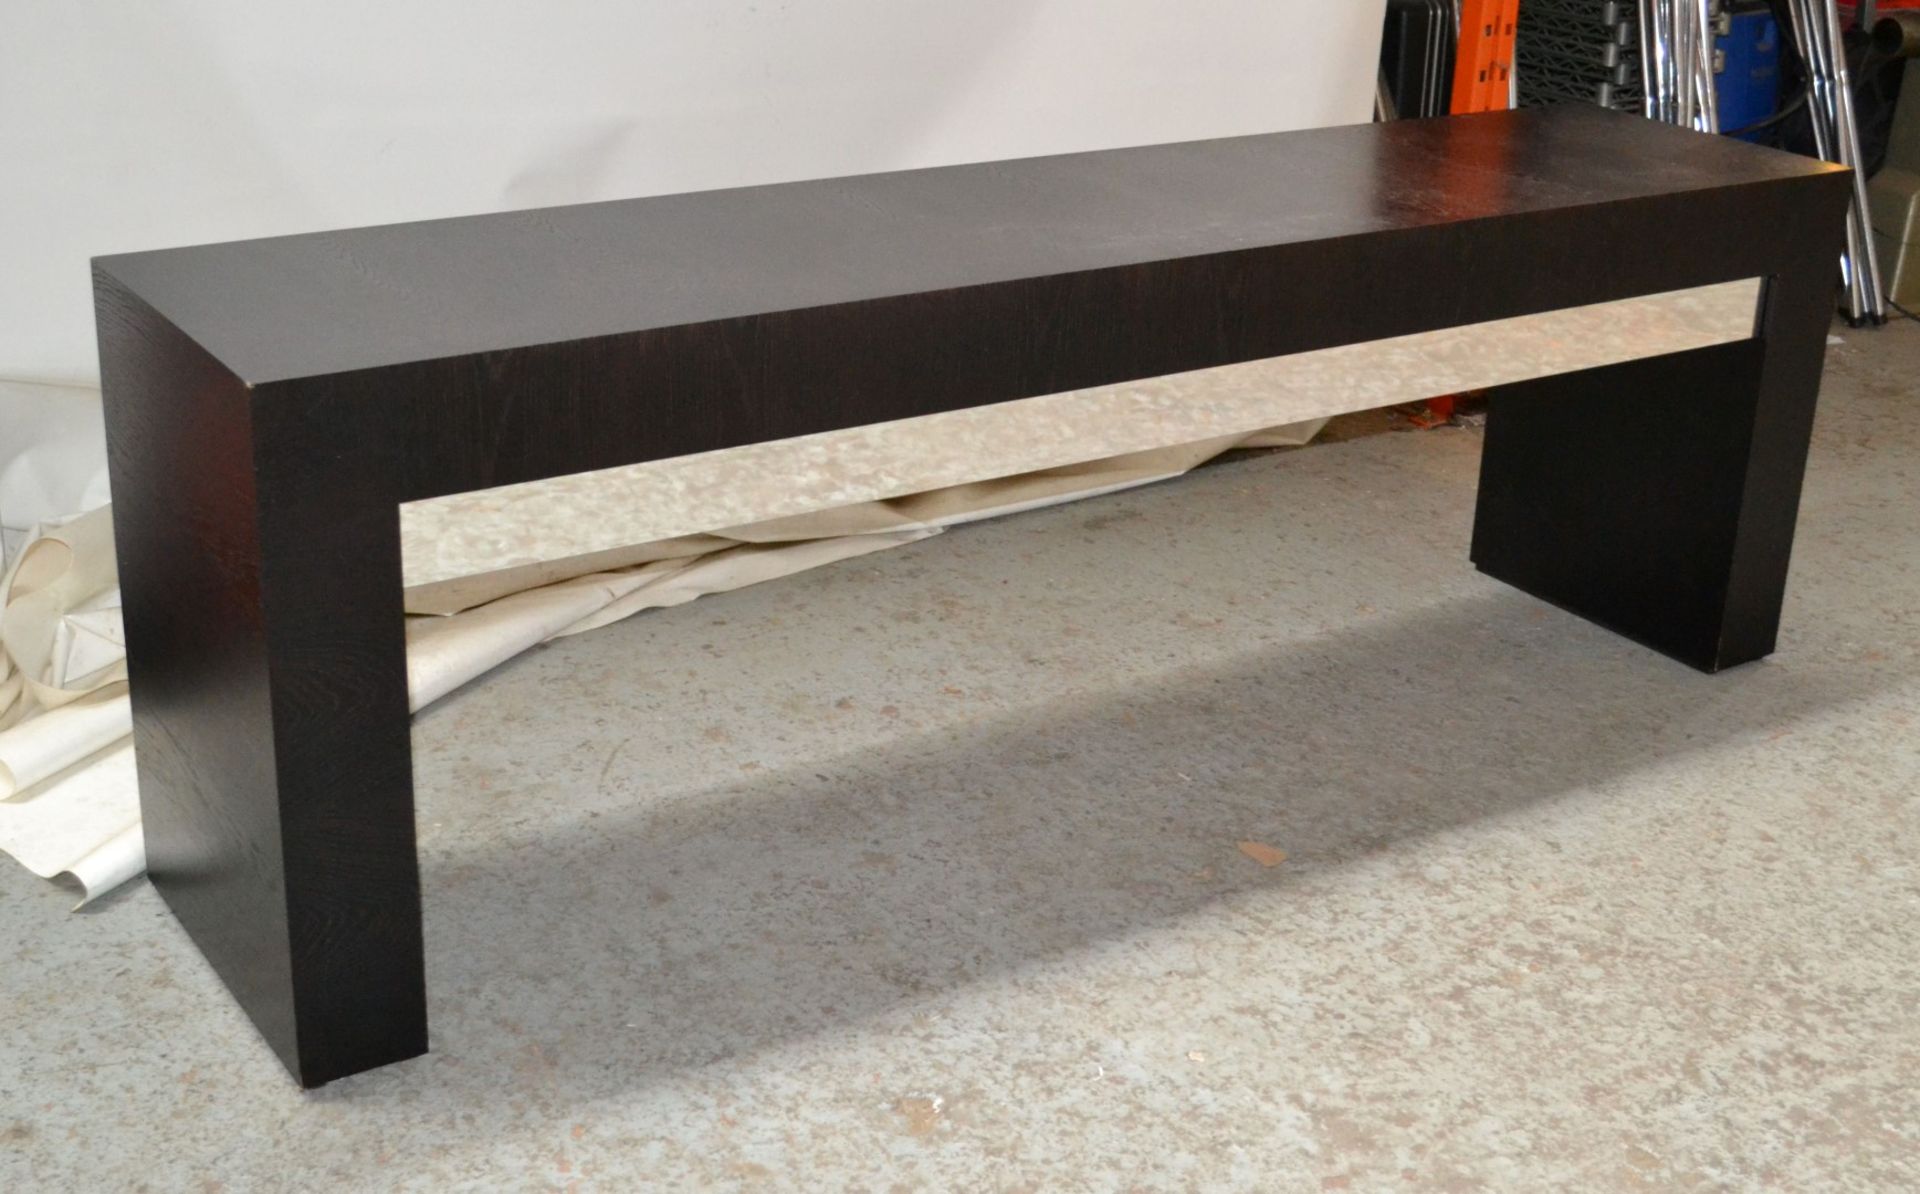 1 x Long Black Serving Table with Cutlery Drawer - CL314 - Location: Altrincham WA14 - *NO VAT On Ha - Image 11 of 14